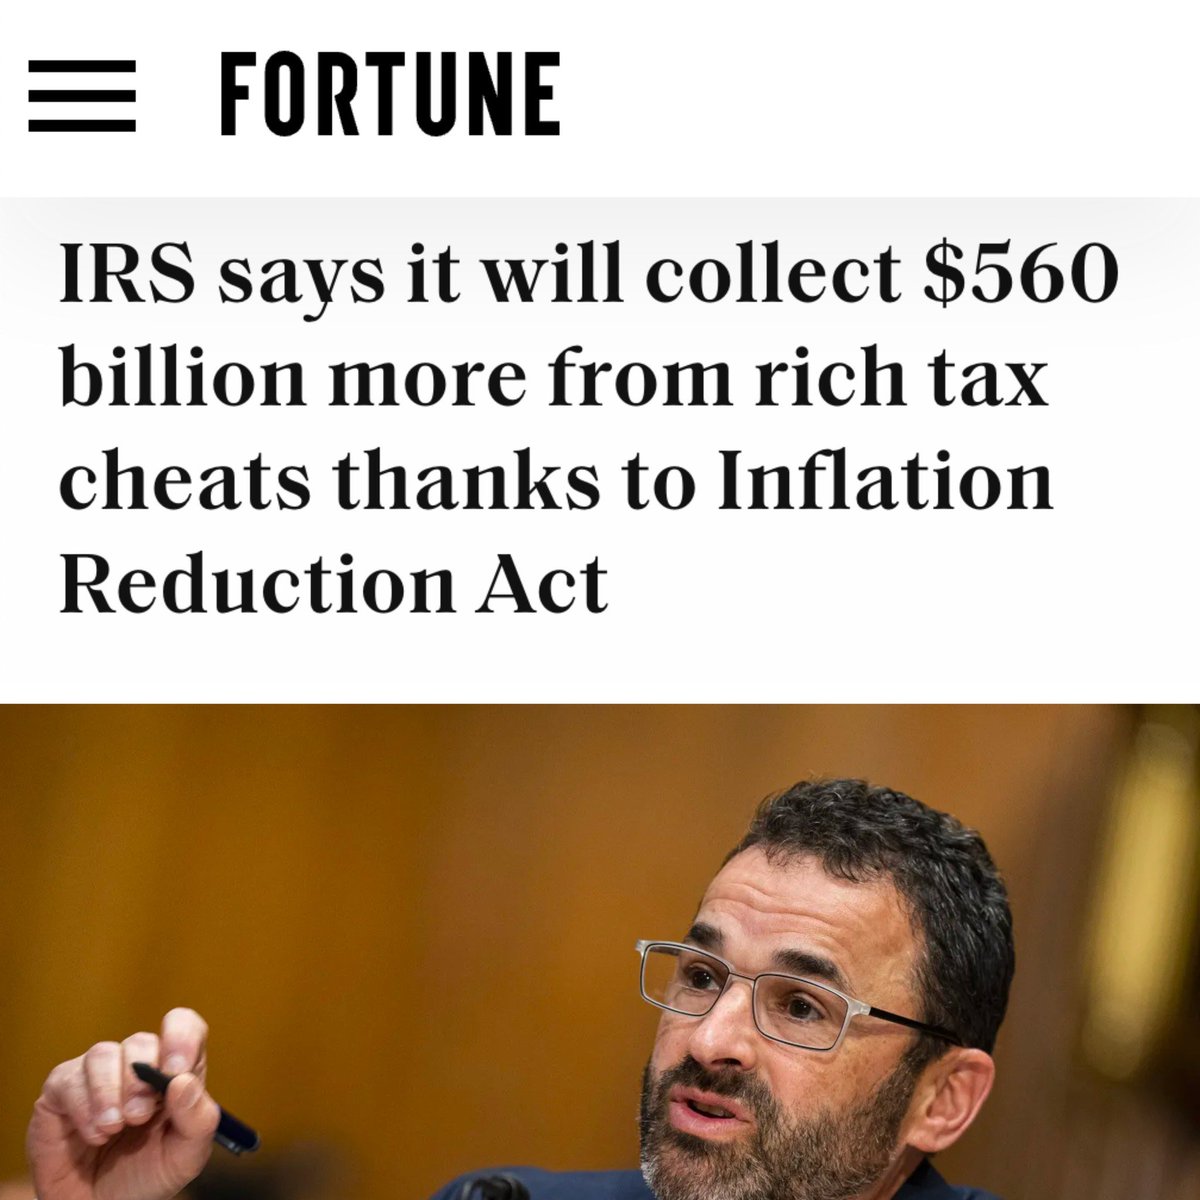 The IRS is poised to collect over half a trillion dollars from rich tax cheats thanks to a law passed by Democrats. Every single republican in Congress voted against stopping millionaire tax crooks and republicans want to help them keep stealing from you.